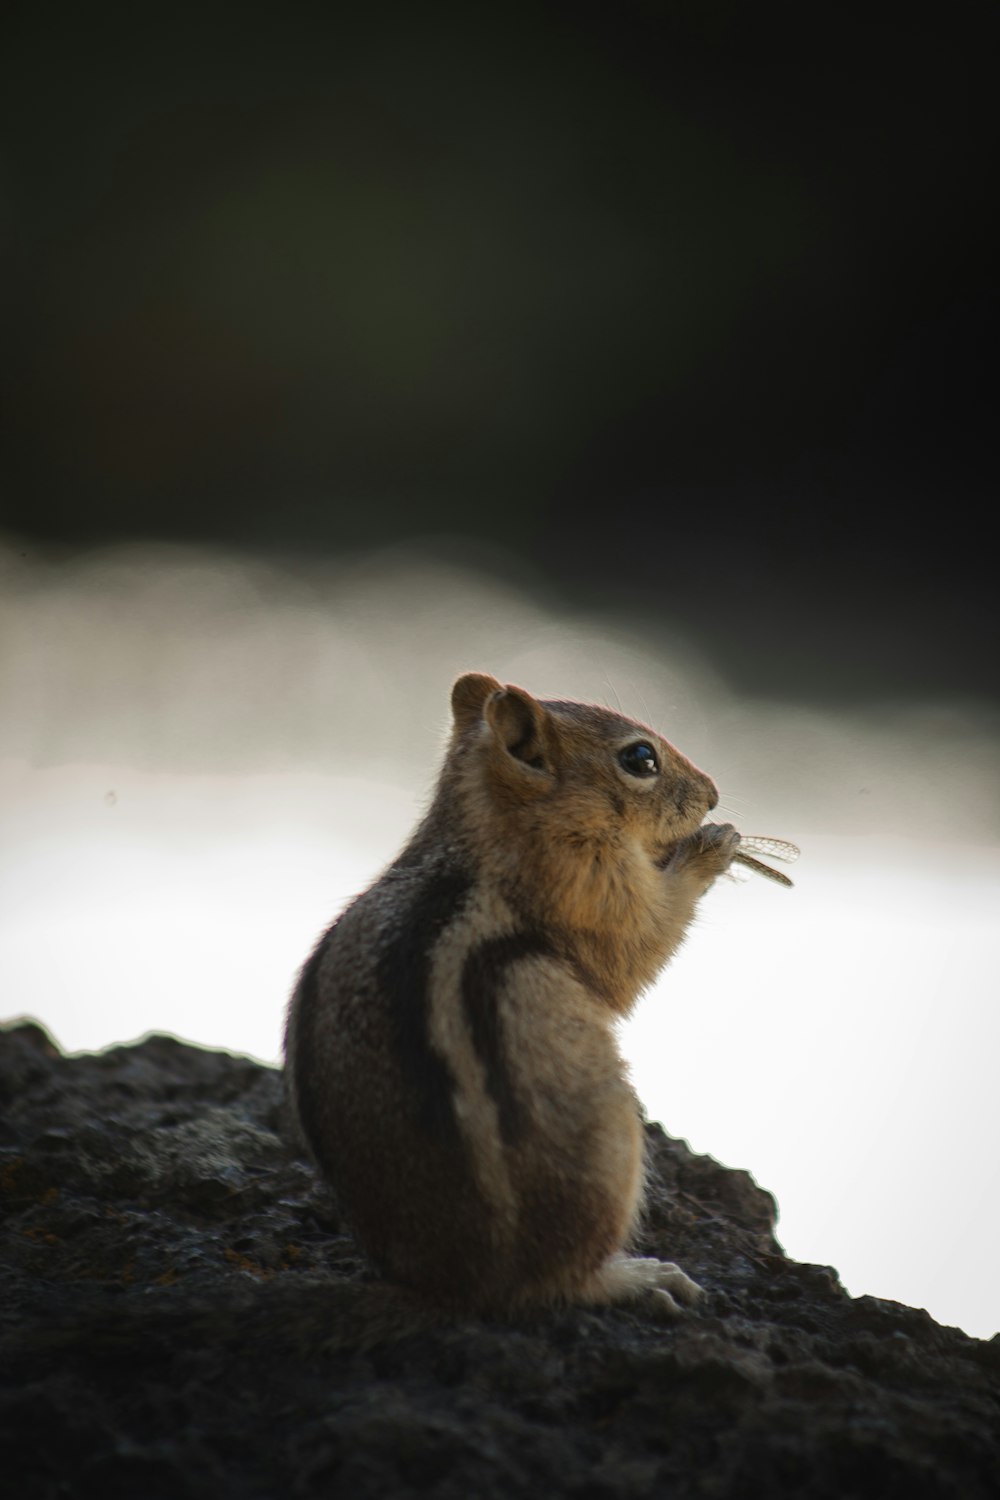 brown and gray squirrel on rock formation